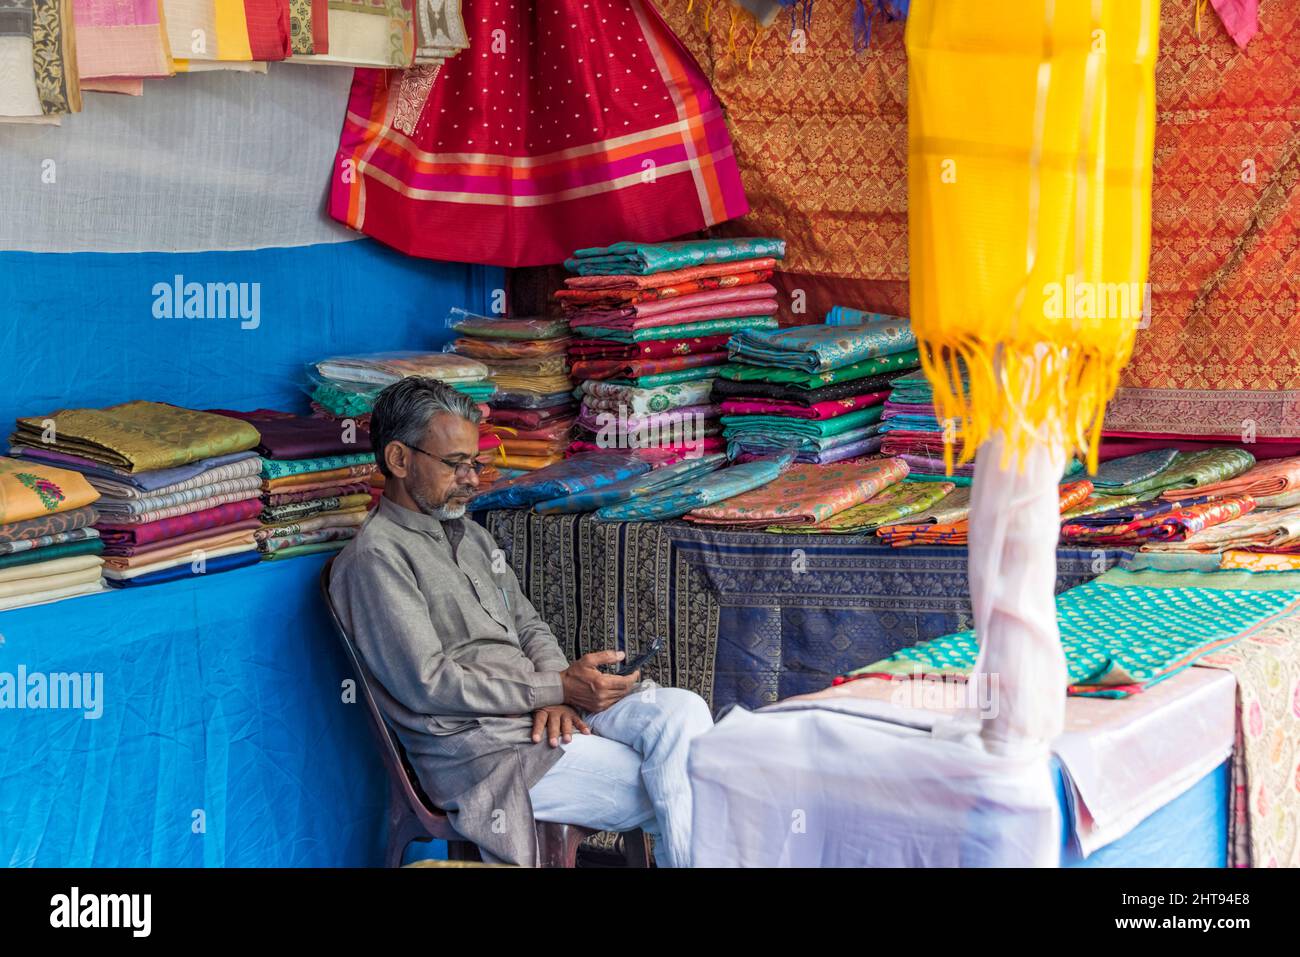 Man watching cell phone at a shop selling fabric, Gangtok, Sikkim, India Stock Photo